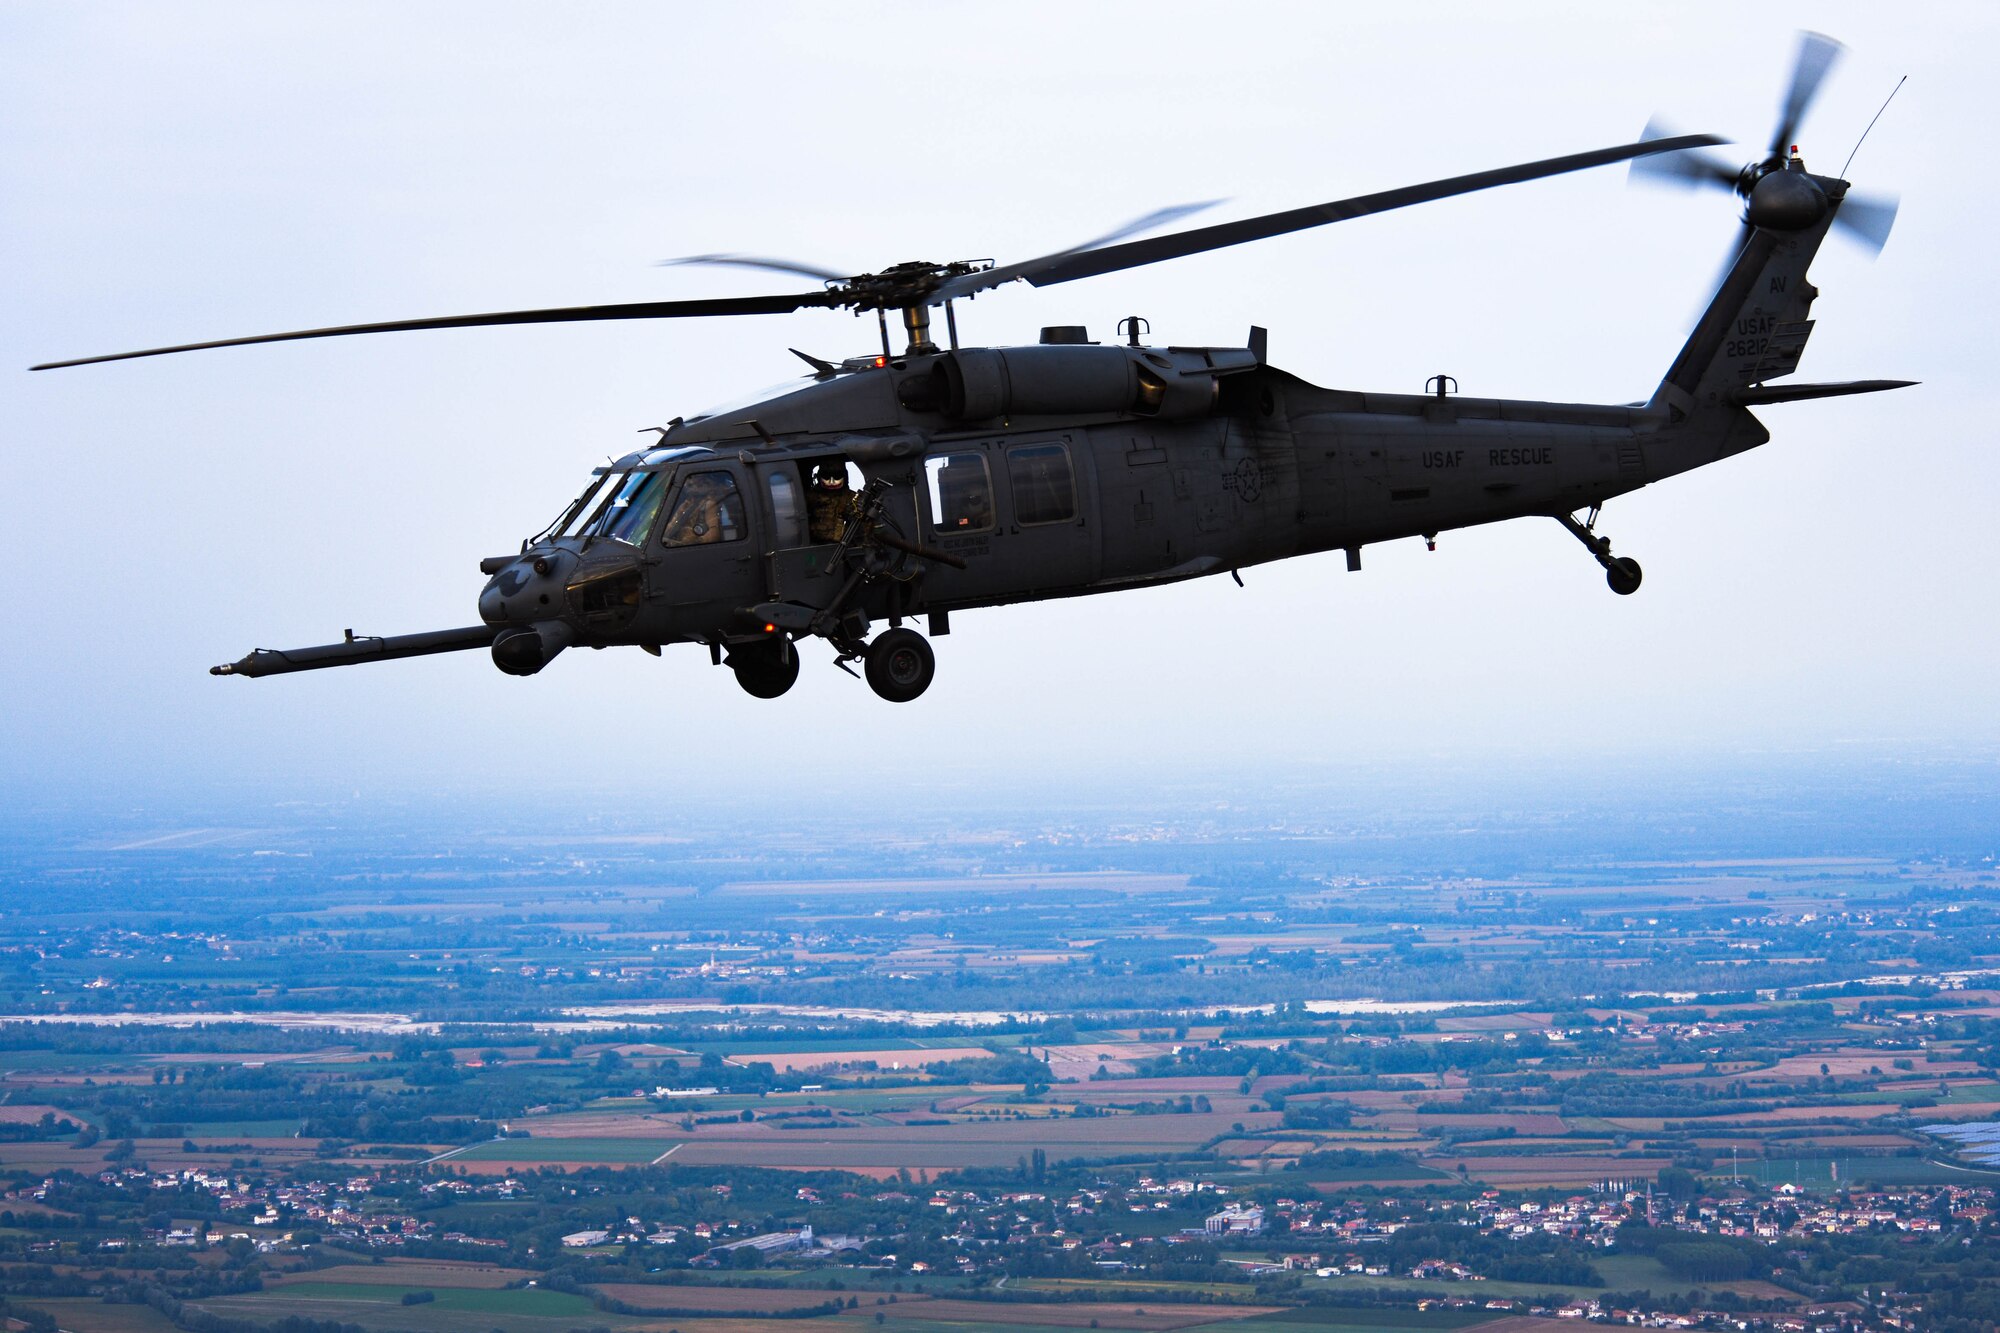 U.S. Air Force HH-60G Pave Hawk A6212 takes its final flight Sept. 23, 2021. A6212 has saved and assisted more than 958 lives and has flown 9,362.4 hours and has retired after 30 years of service. (U.S. Air Force photo by Senior Airman Brooke Moeder)